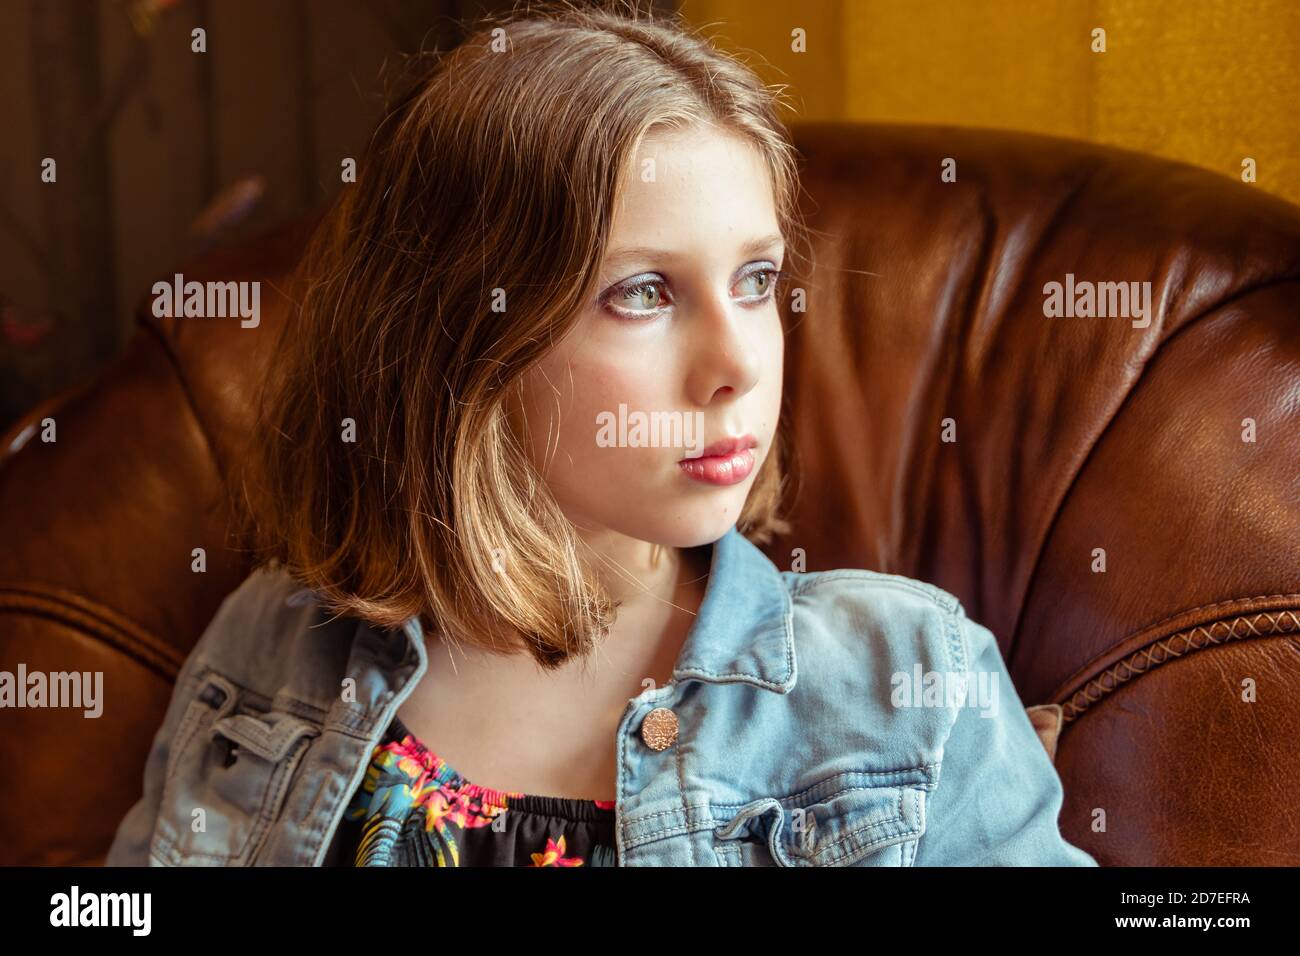 A natural portrait of a tween or teen girl with bobbed hair sat in an armchair, sad or melancholy thoughtfulness Stock Photo